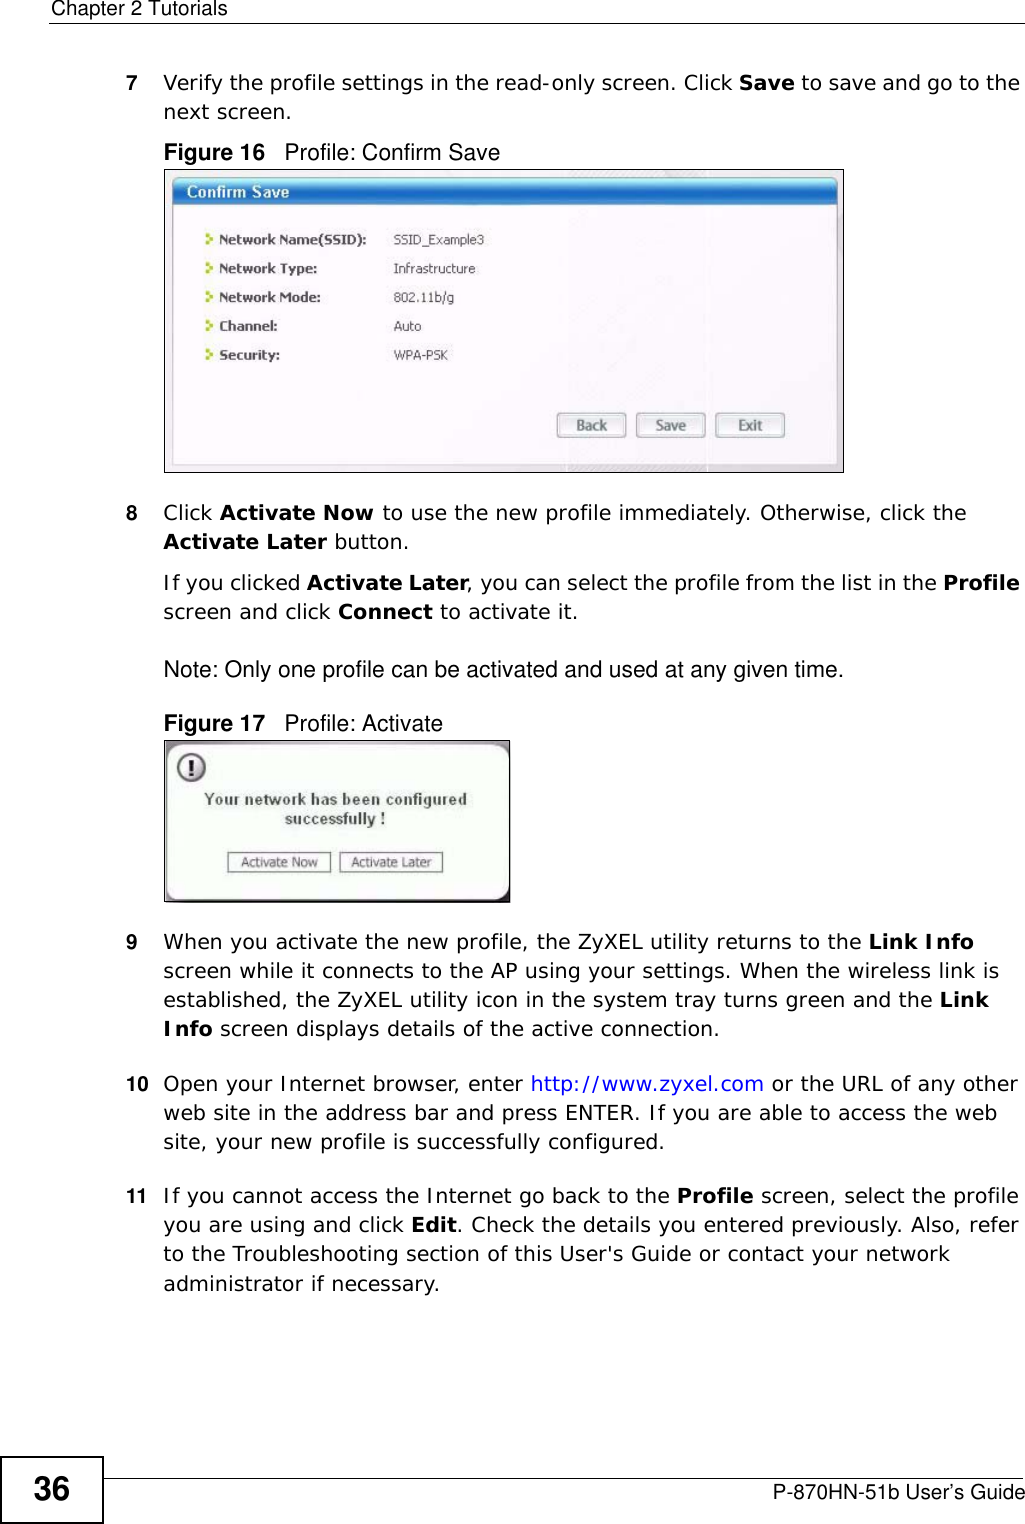 Chapter 2 TutorialsP-870HN-51b User’s Guide367Verify the profile settings in the read-only screen. Click Save to save and go to the next screen. Figure 16   Profile: Confirm Save8Click Activate Now to use the new profile immediately. Otherwise, click the Activate Later button. If you clicked Activate Later, you can select the profile from the list in the Profile screen and click Connect to activate it.Note: Only one profile can be activated and used at any given time.Figure 17   Profile: Activate9When you activate the new profile, the ZyXEL utility returns to the Link Info screen while it connects to the AP using your settings. When the wireless link is established, the ZyXEL utility icon in the system tray turns green and the Link Info screen displays details of the active connection. 10 Open your Internet browser, enter http://www.zyxel.com or the URL of any other web site in the address bar and press ENTER. If you are able to access the web site, your new profile is successfully configured. 11 If you cannot access the Internet go back to the Profile screen, select the profile you are using and click Edit. Check the details you entered previously. Also, refer to the Troubleshooting section of this User&apos;s Guide or contact your network administrator if necessary.